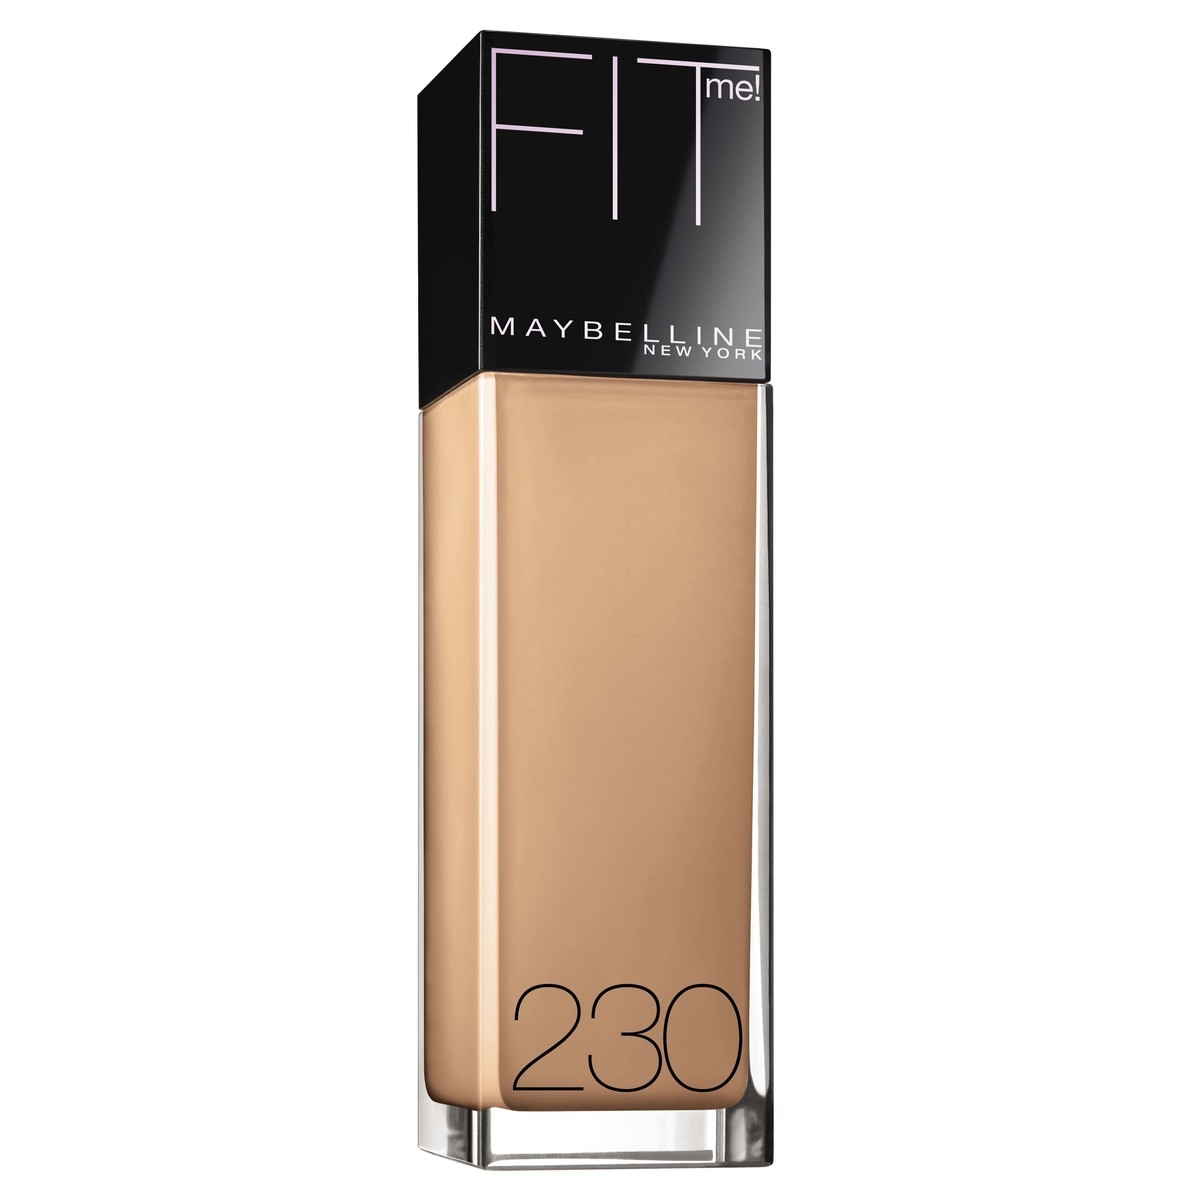 Maybelline Fit Me Foundation - Natural Buff 230